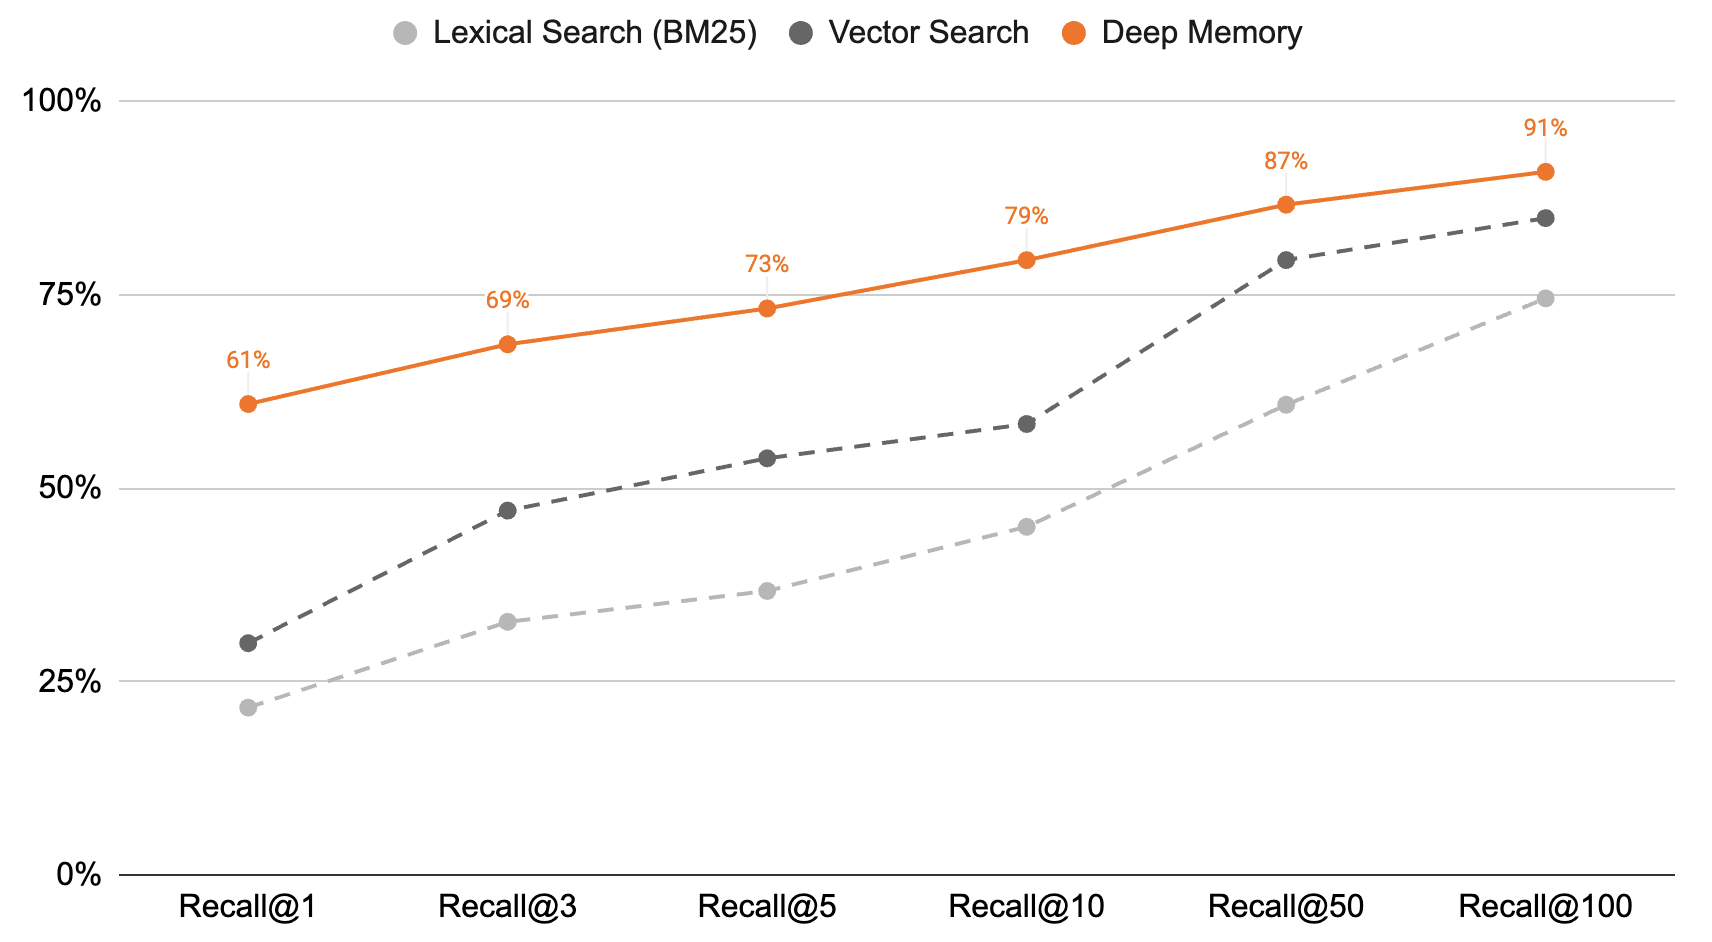 Deep Memory compared to Lexical Search and Vector Search